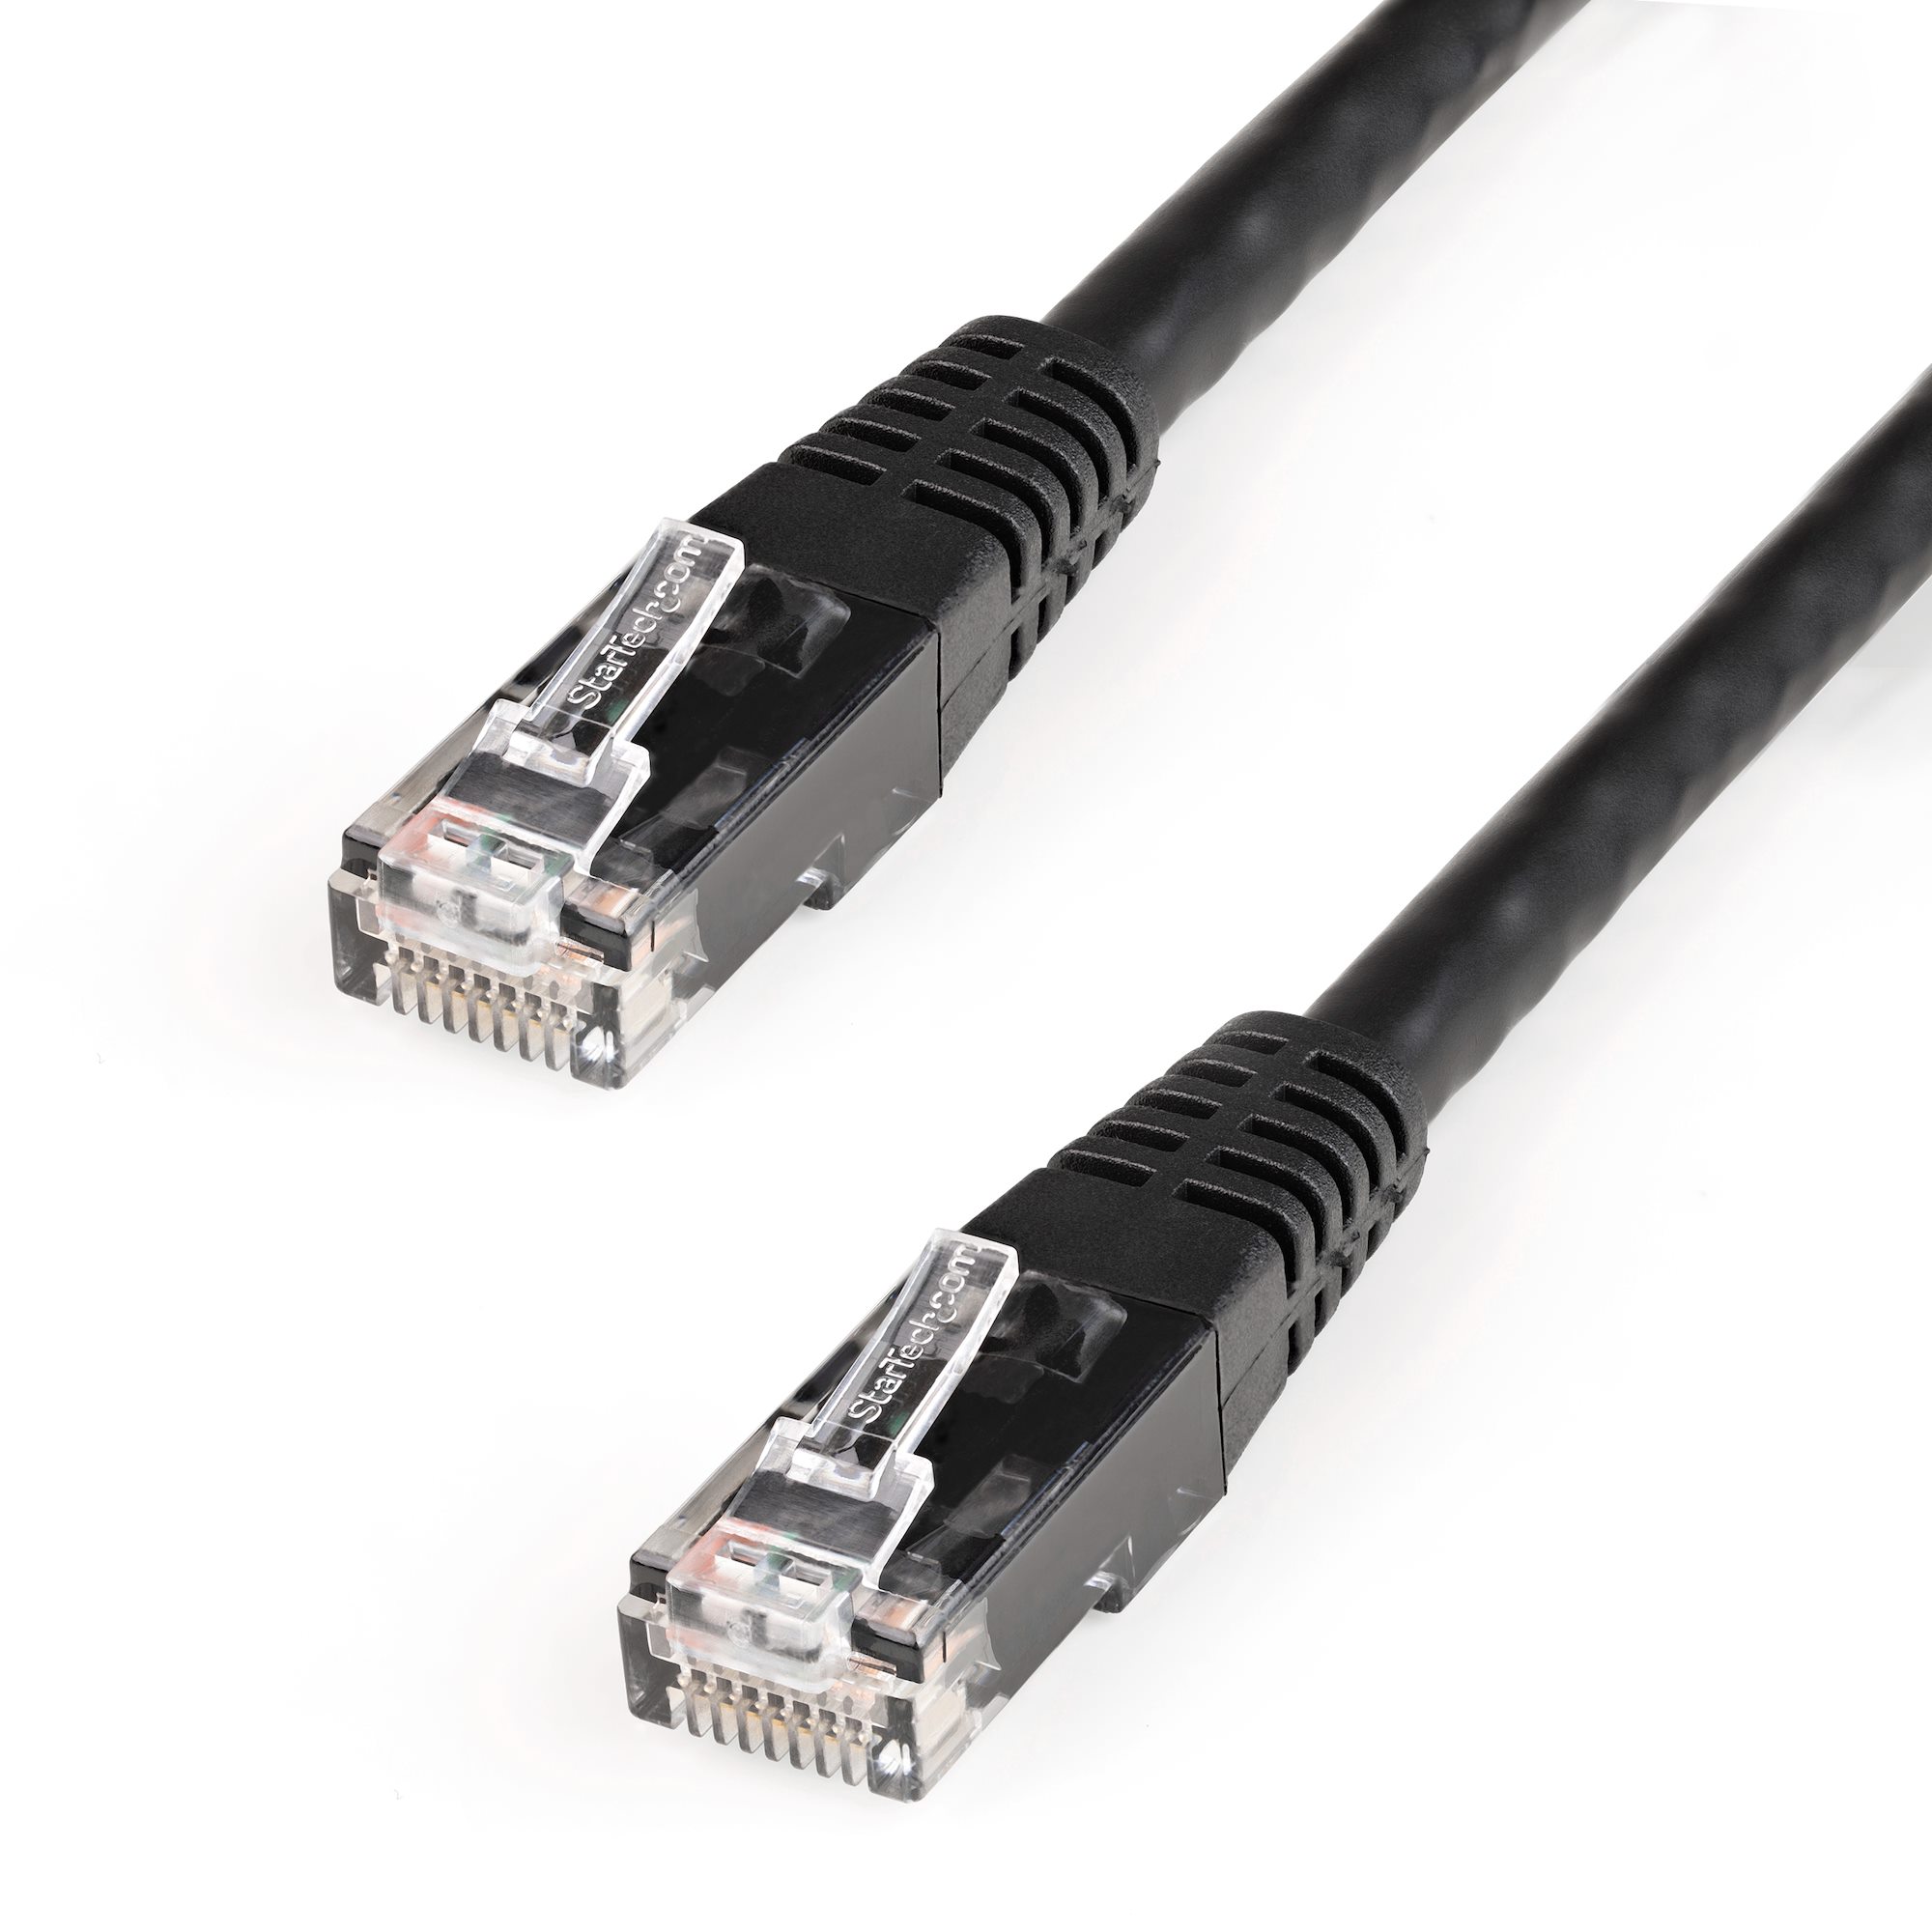 100 Ft Cat6 Ethernet Network Patch Cable for Computer Broadband Internet Router 